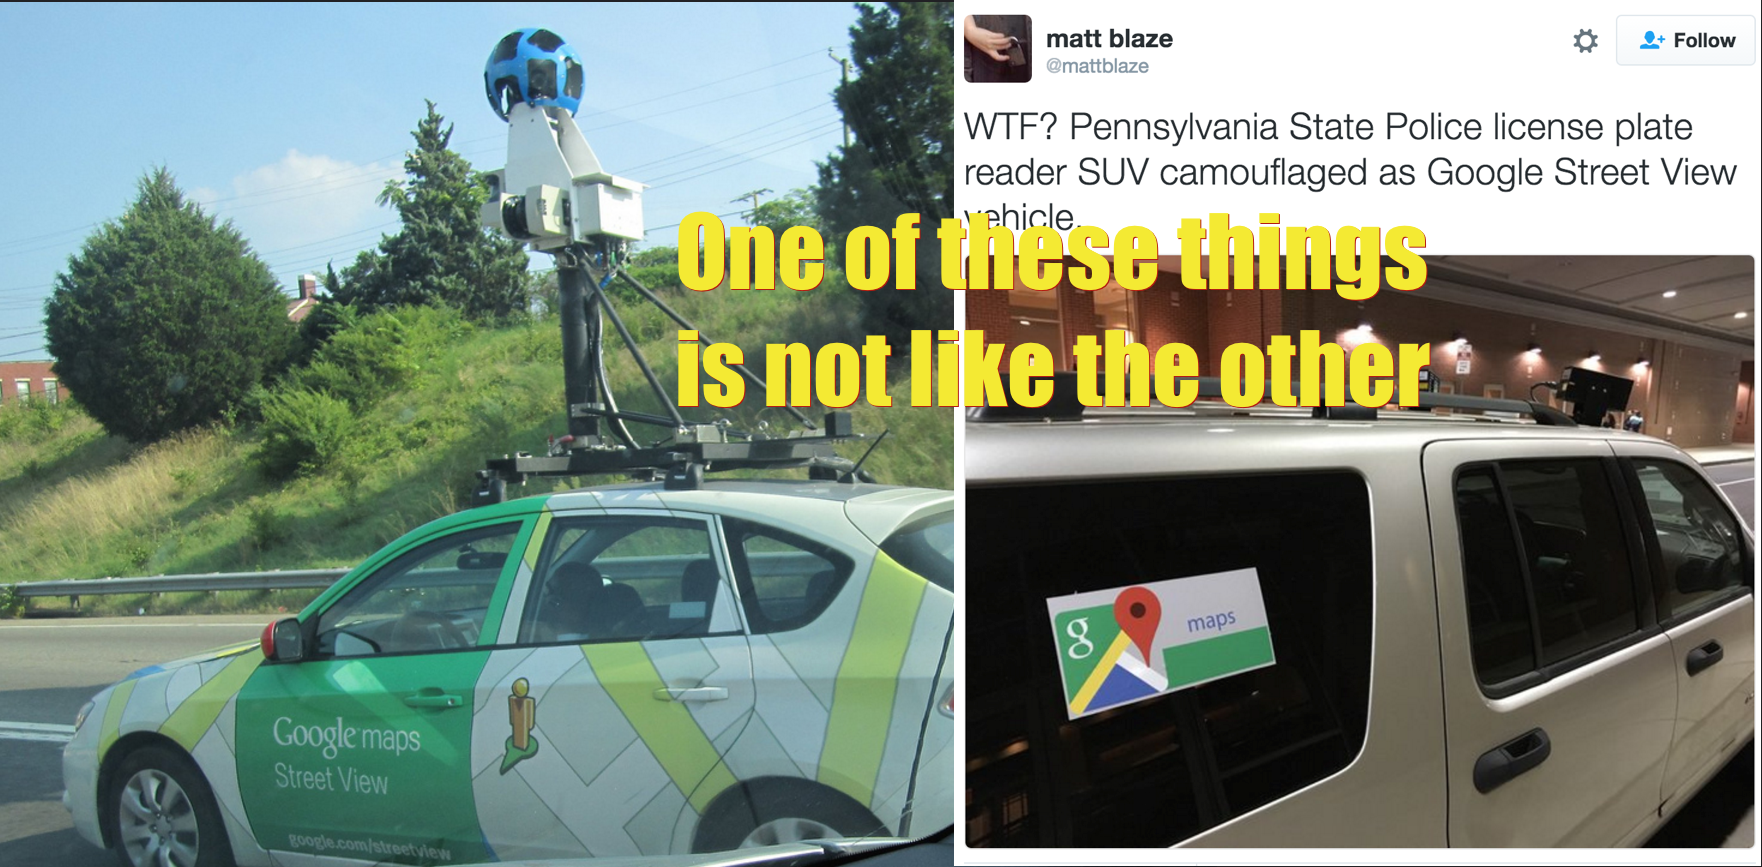 Police Tried To Disguise Surveillance Vehicle As “Google Maps” Truck